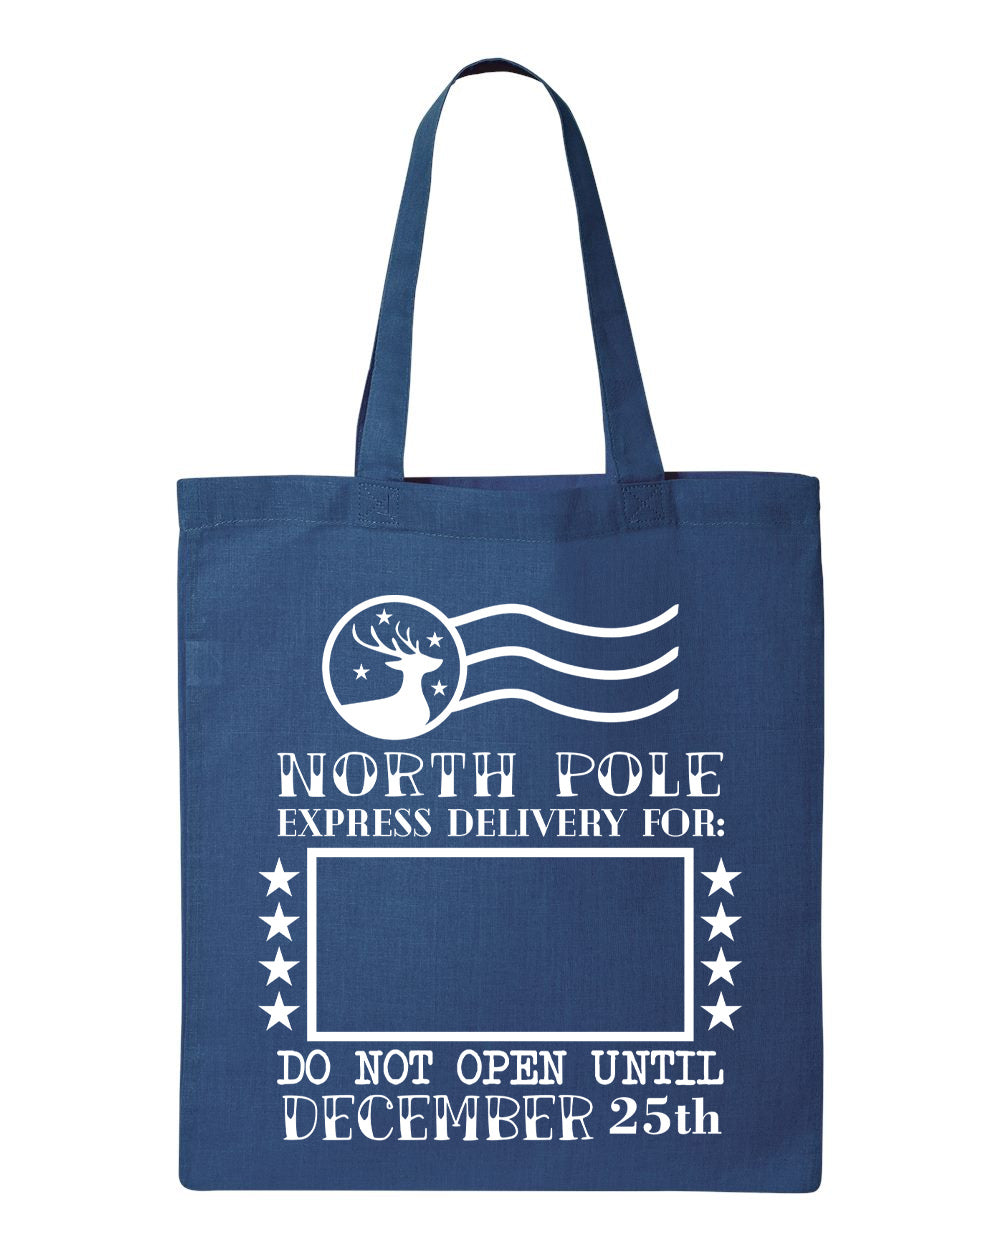 North Pole Express Delivery Tote Bag